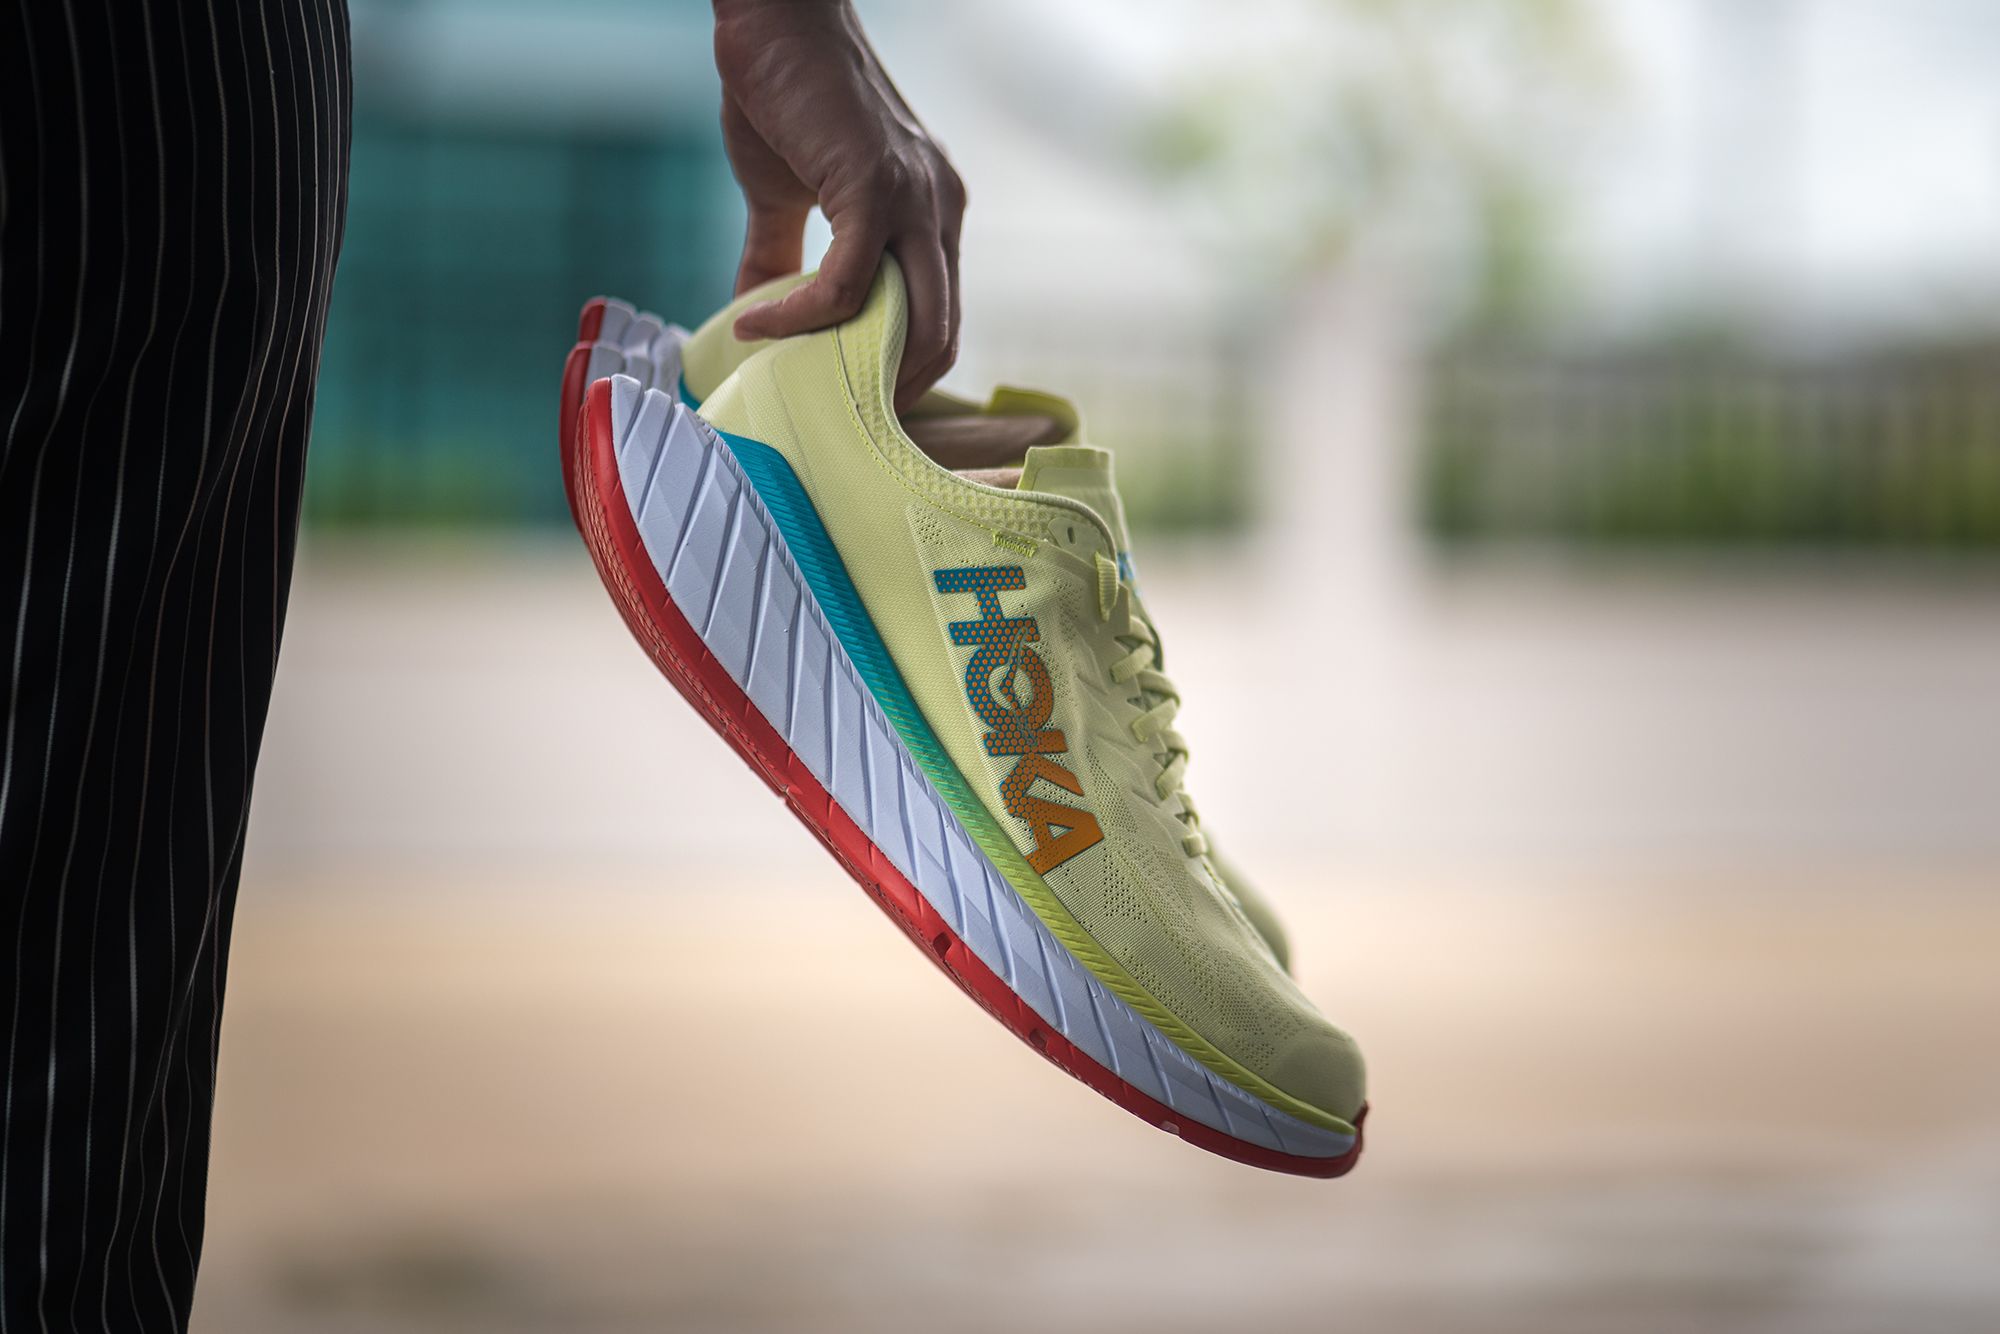 Staat Serena stapel Hoka sneakers: Why these chunky, ugly running shoes are selling like crazy  | CNN Business